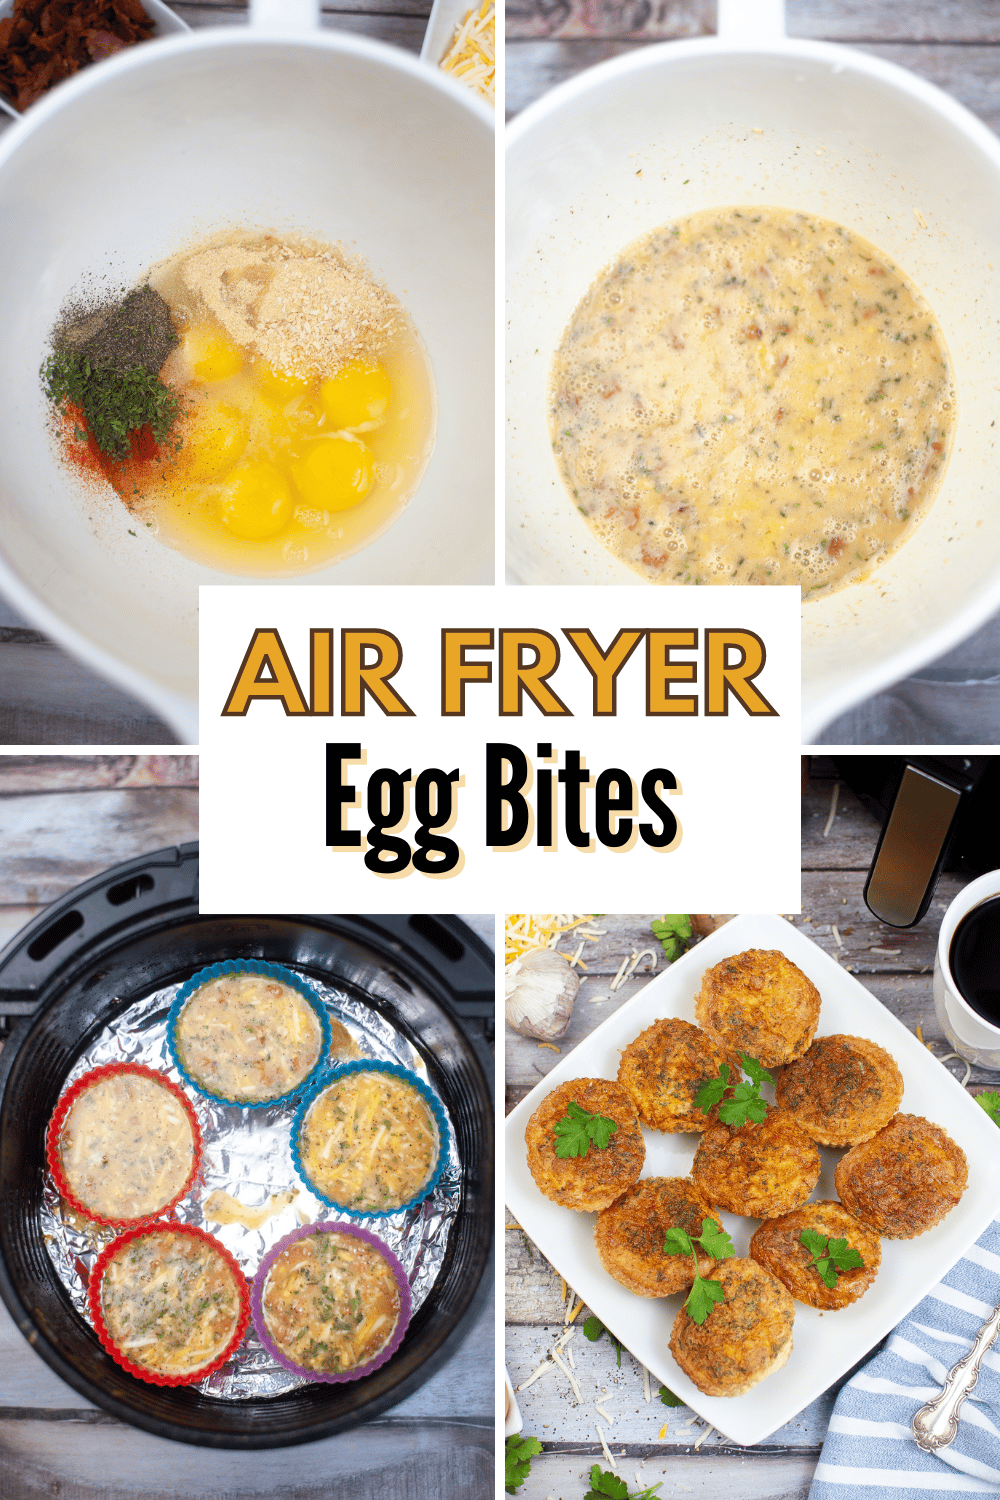 Air Fryer Egg Bites are a quick and easy breakfast that can be made ahead of time and reheated on busy mornings. They're packed with flavor! #airfryereggbites #airfryer #eggbites #breakfast #recipe via @wondermomwannab